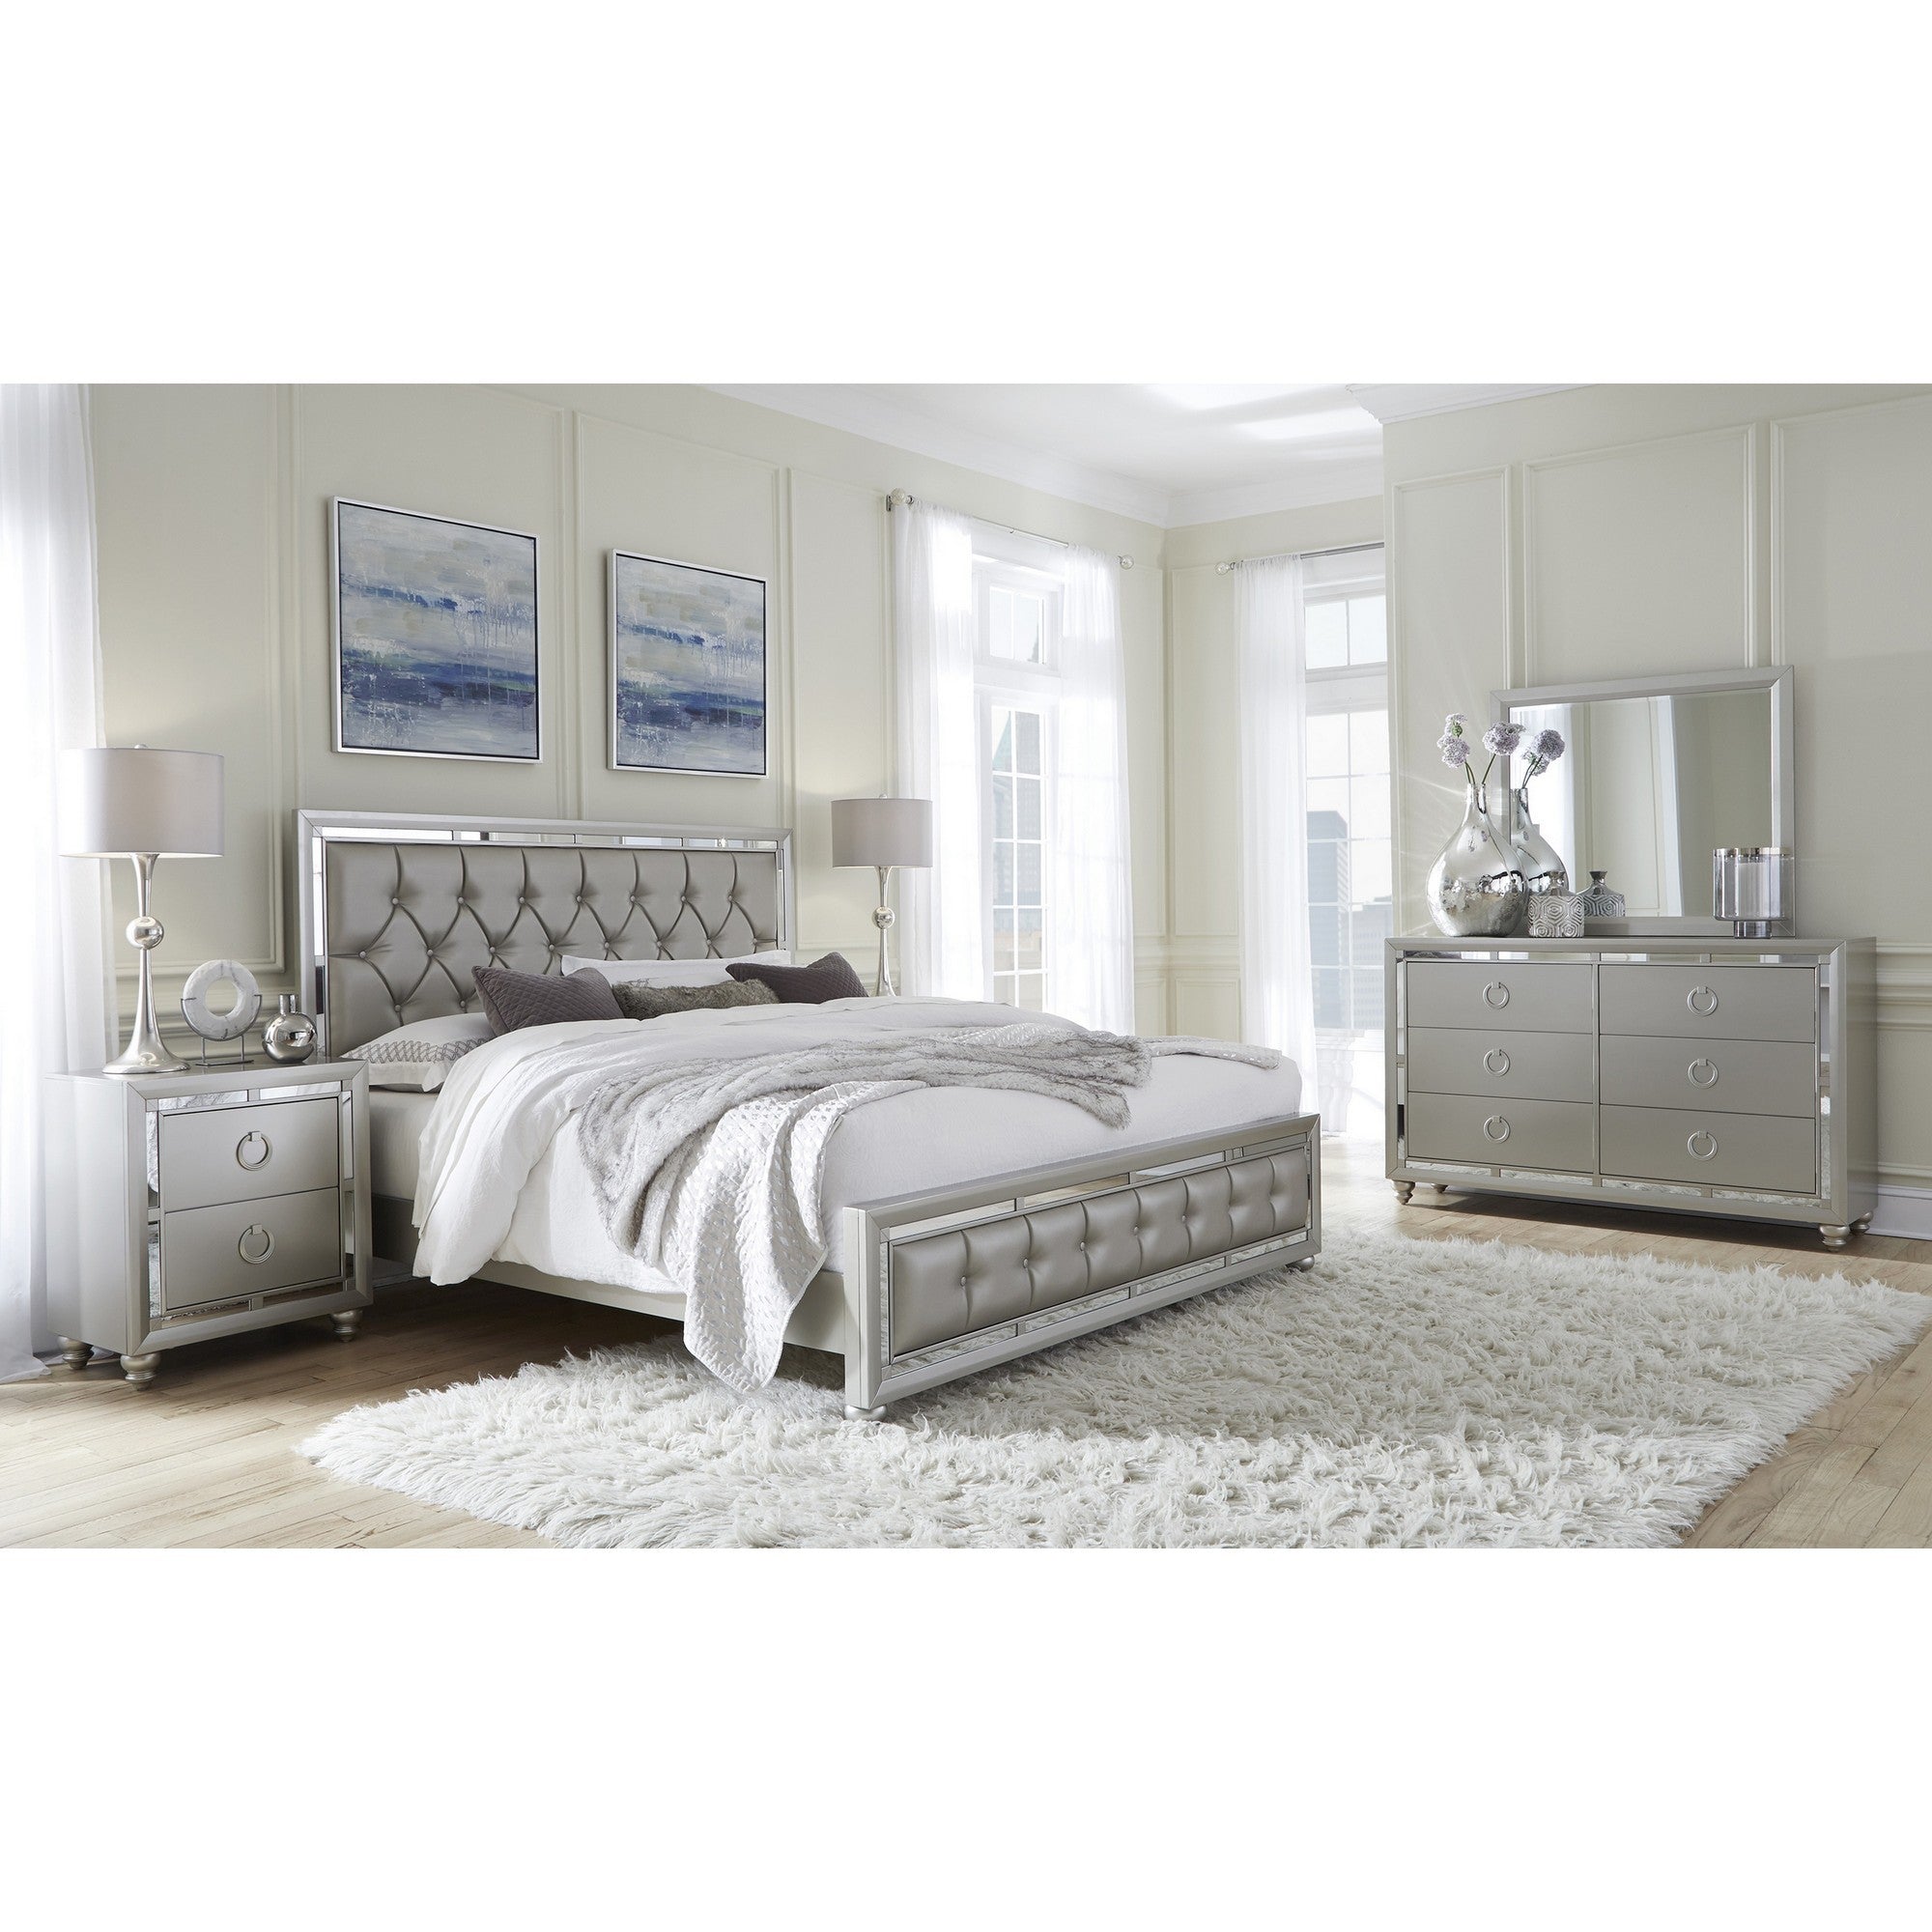 Silver Champagne Tone Dresser with Mirror Trim Accent  6 Drawers